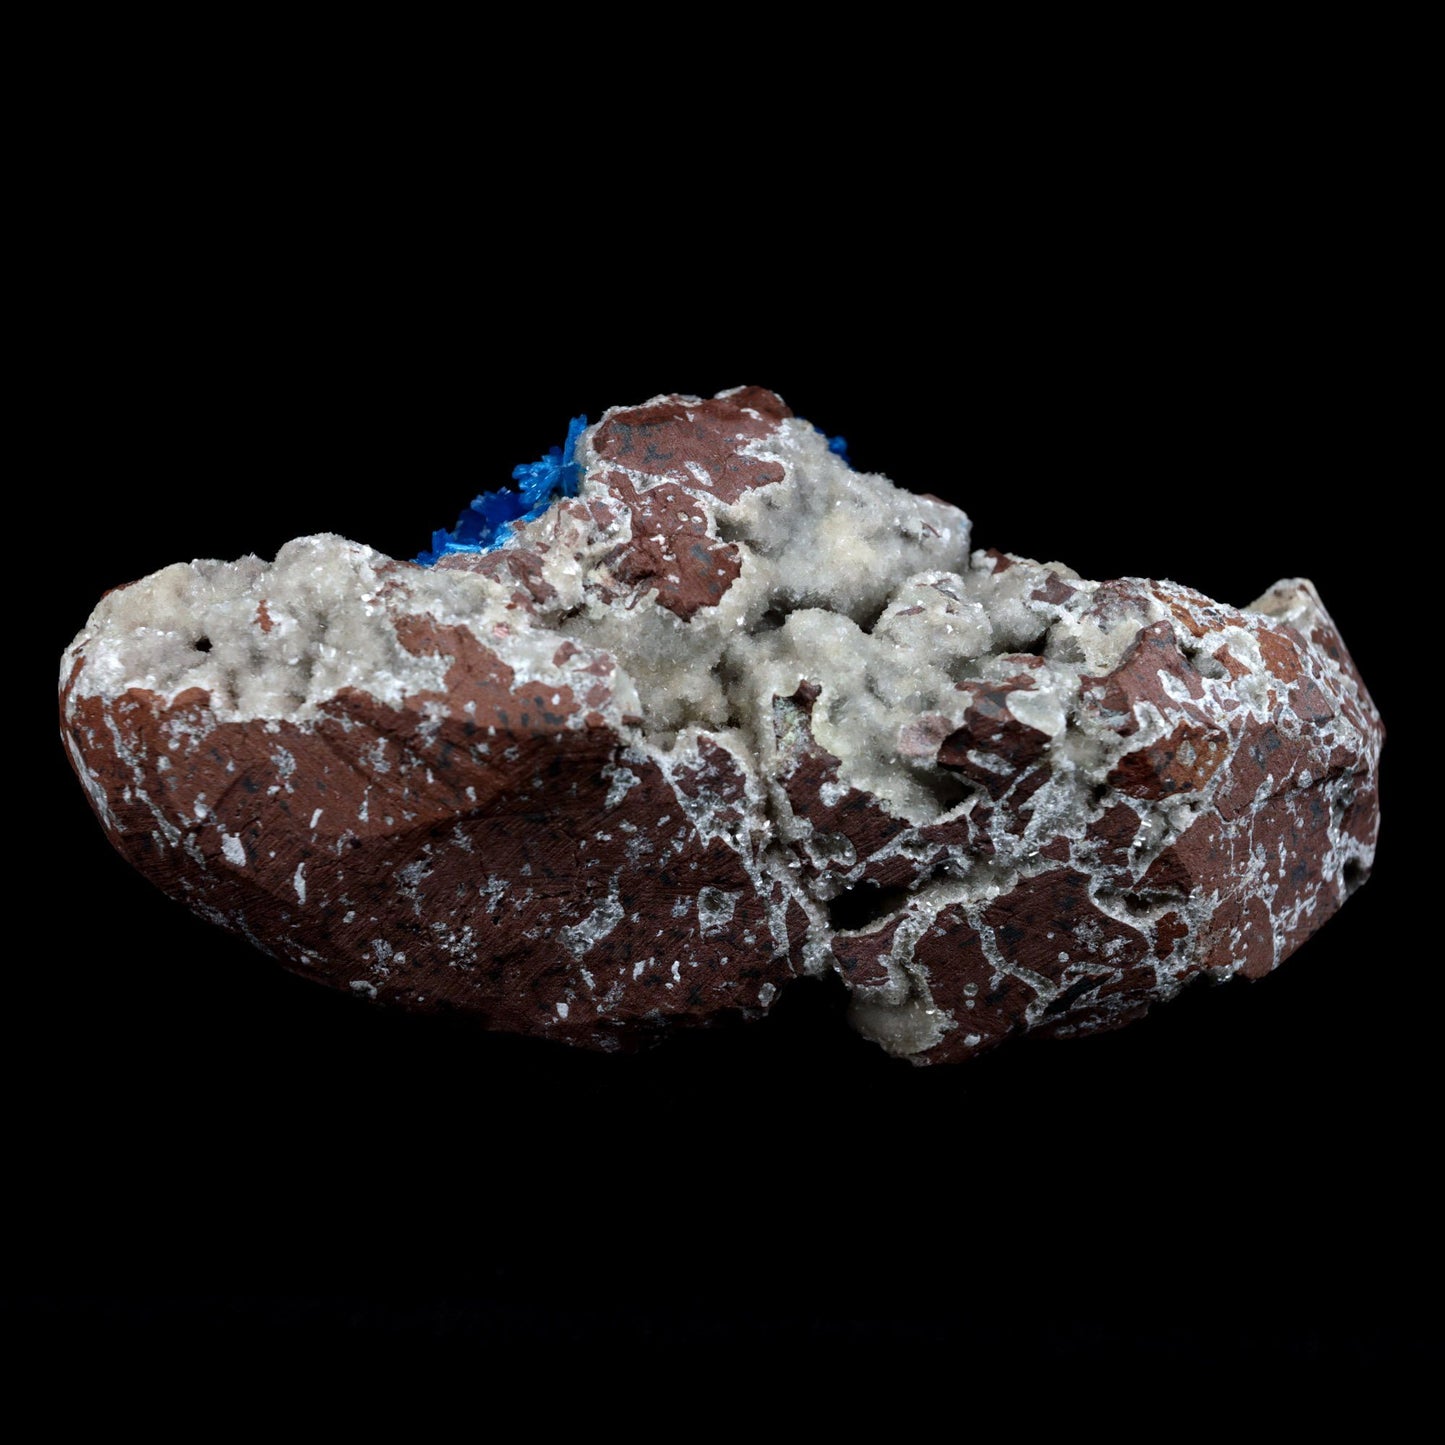 Cavansite Balls on Heuandite Cluster (Rare Find) Natural Mineral Speci…  https://www.superbminerals.us/products/cavansite-balls-on-heuandite-cluster-rare-find-natural-mineral-specimen-b-4870  Features: This magnificent piece is composed of a radial group of superb deep blue Cavansite crystals on basalt, You can see several various forms of crystallisation in this piece, all of which have the same, strong, saturated blue colour that is honestly SO blue that it appears to be a fake